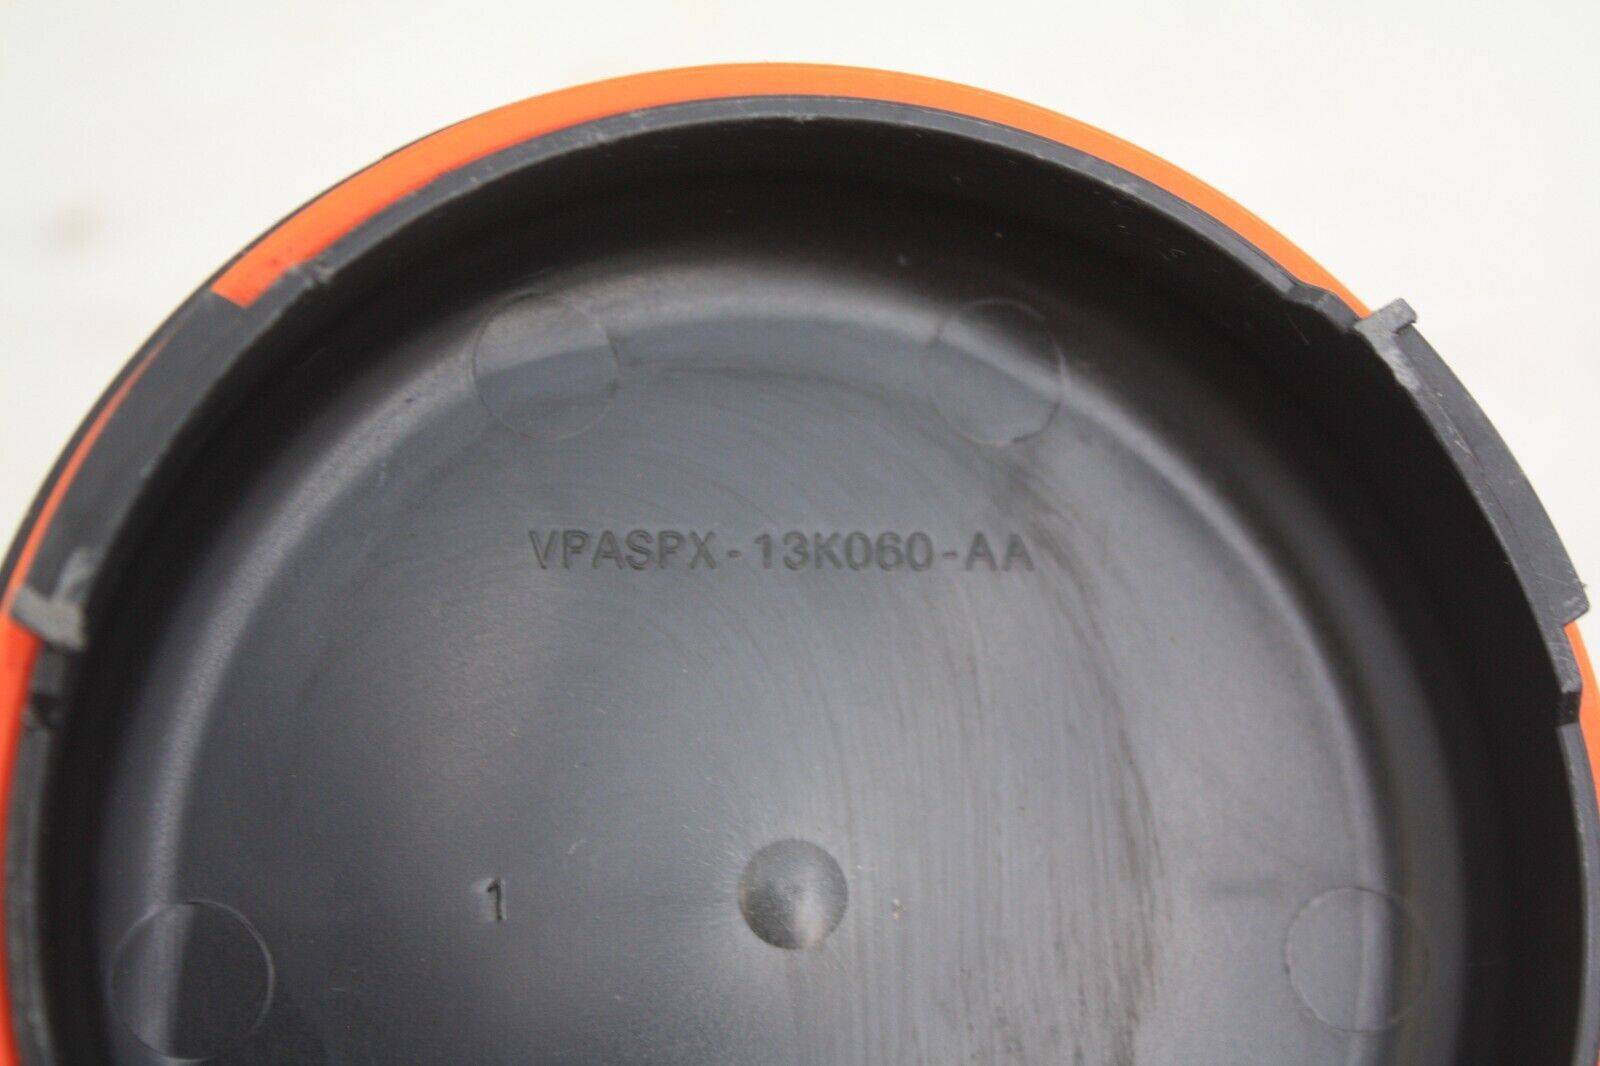 Land-Rover-Discovery-Sport-Headlight-Cover-Cap-VPASPX-13K060-AA-Genuine-175775100135-5